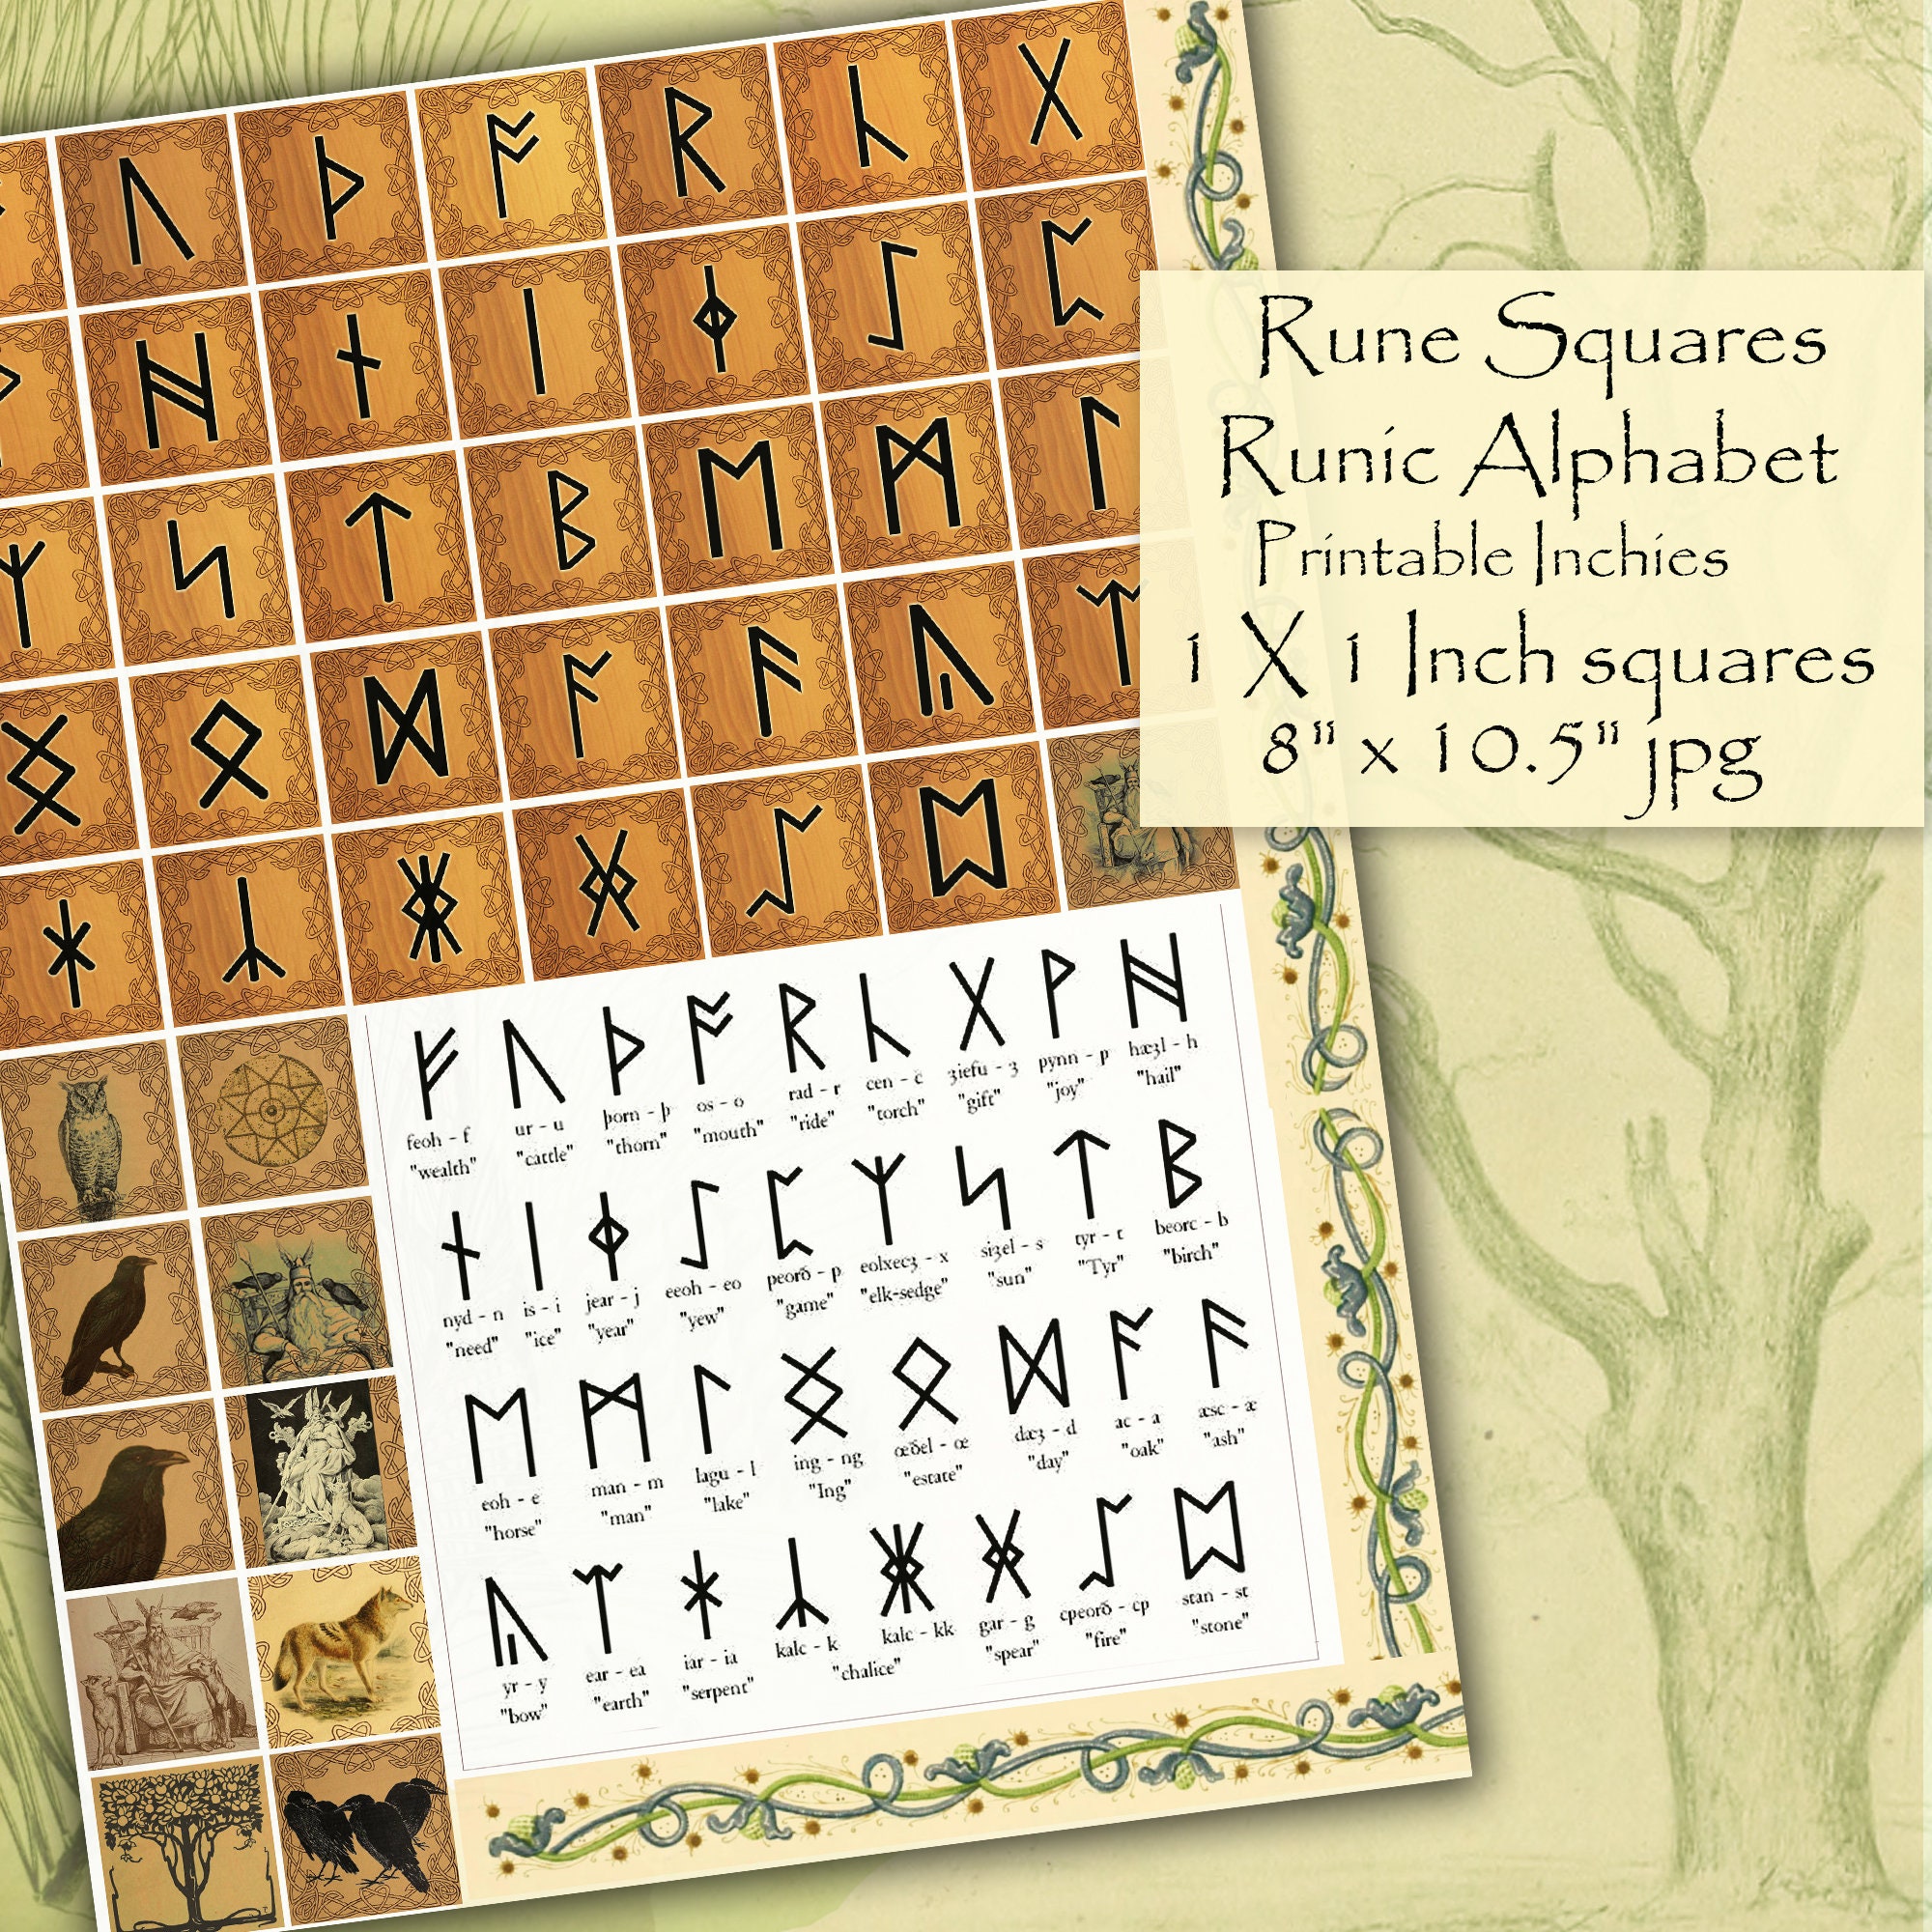 BIND RUNES Runic Alphabet Letters Personalized ADD Ons to Your